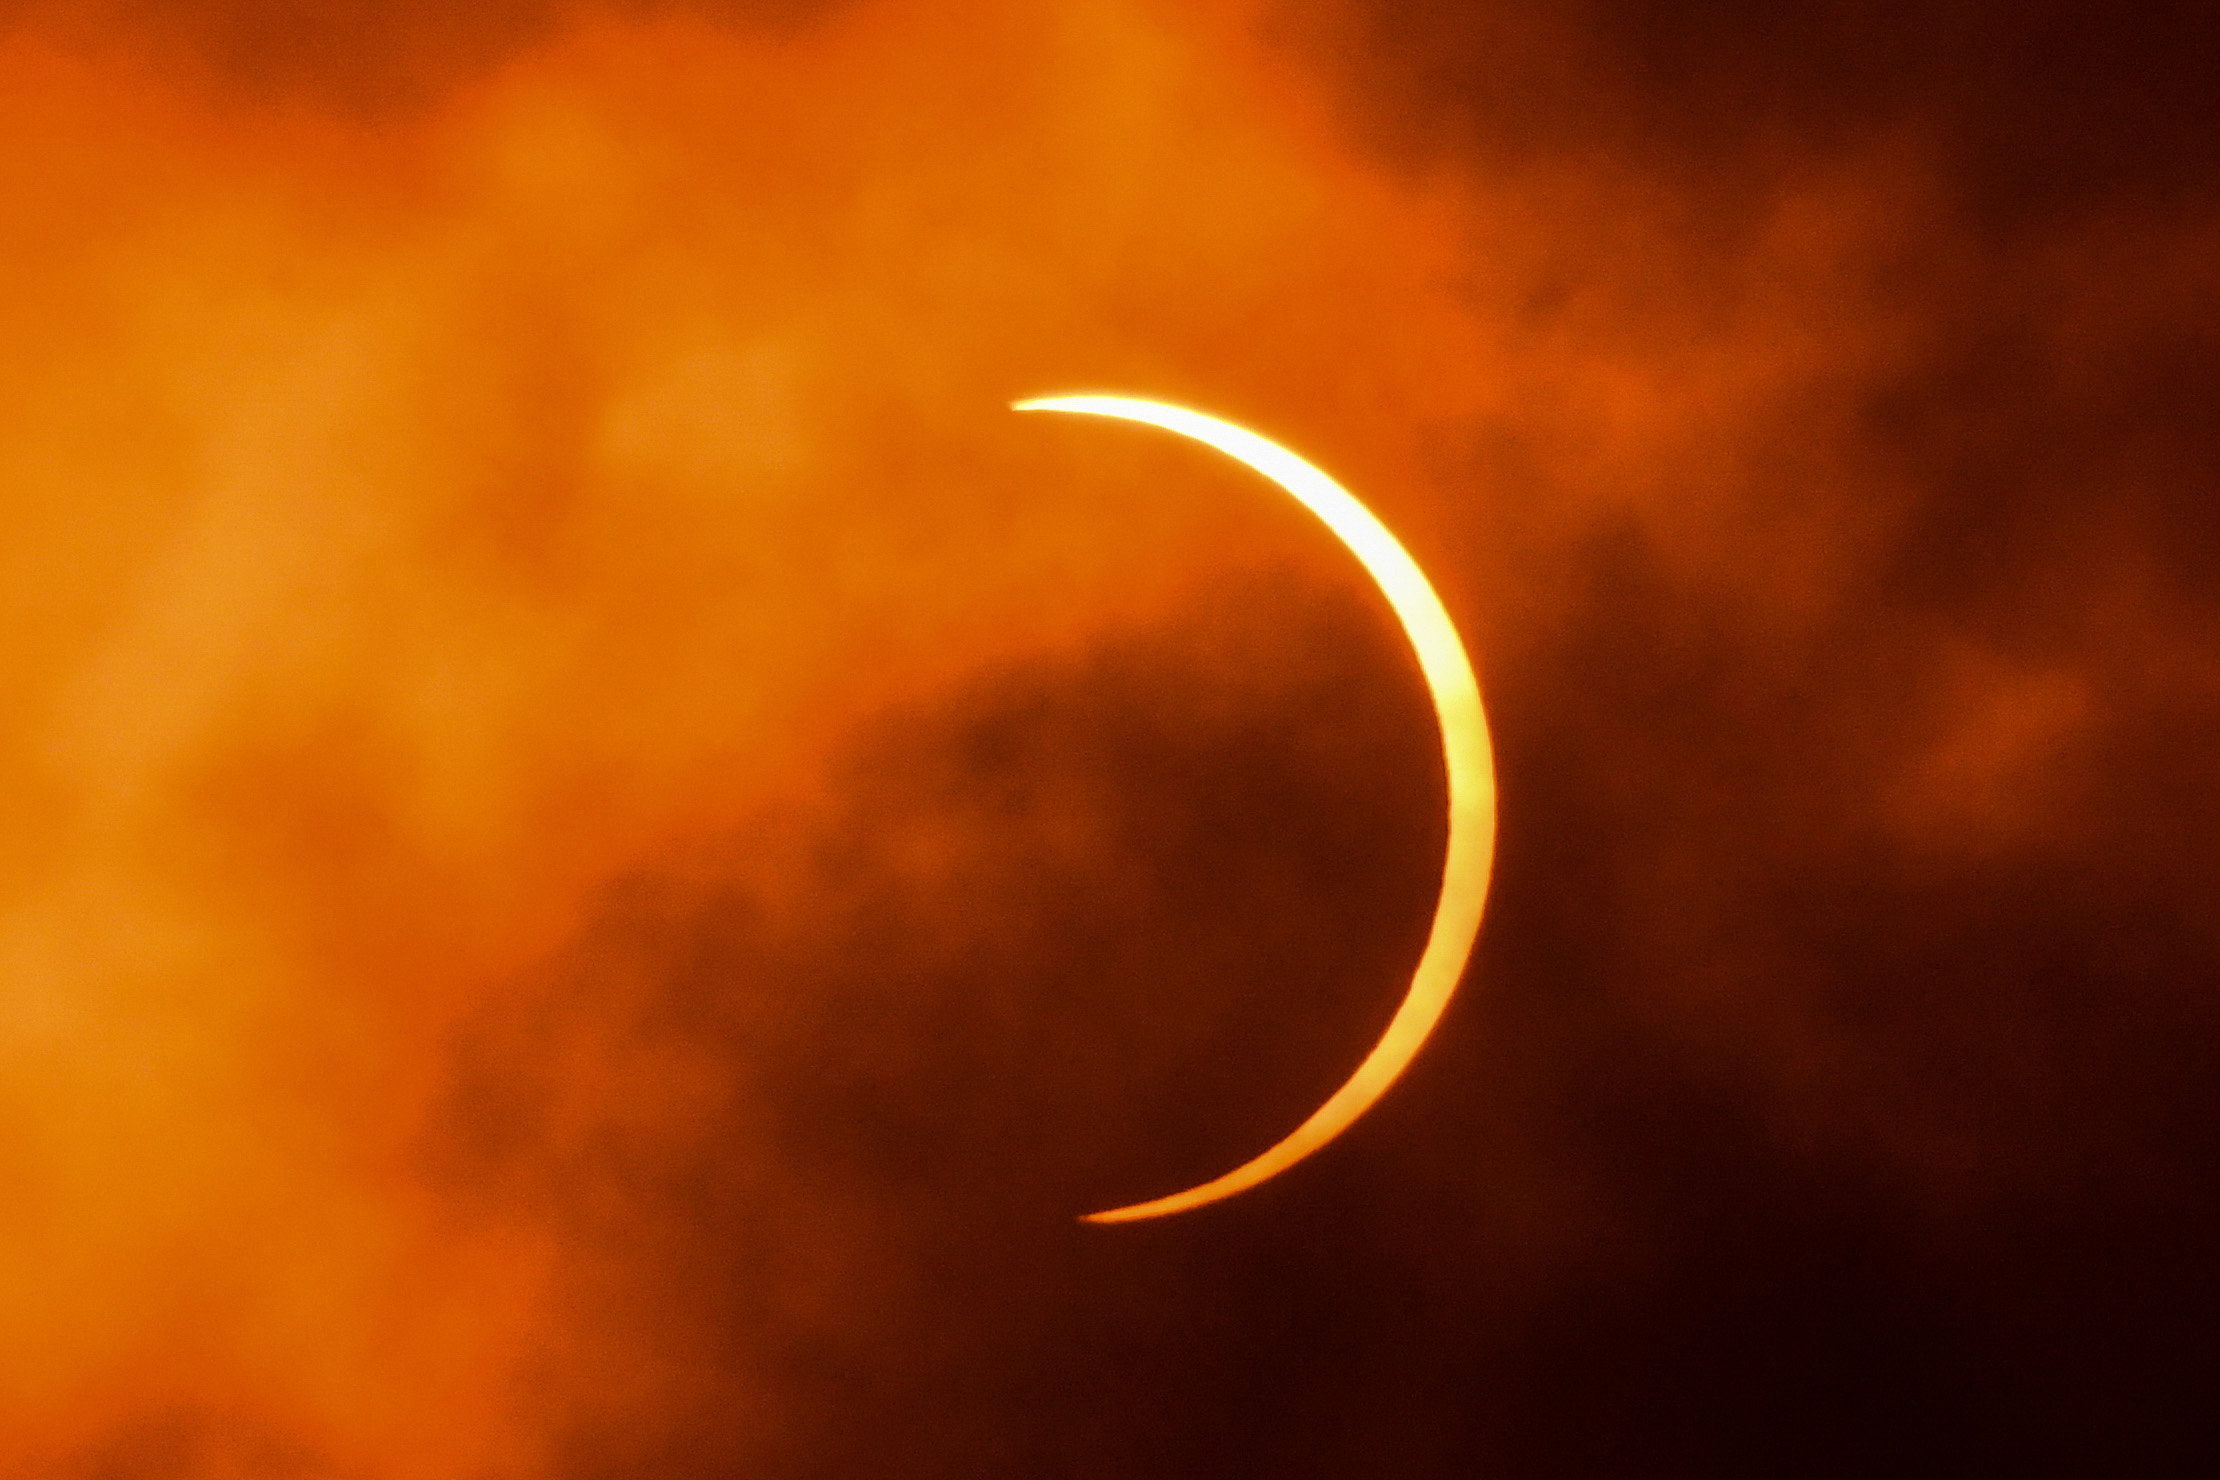 PHOTO: In this June 21, 2020, file photo, the moon moves in front of the sun during an solar eclipse as seen through clouds from New Delhi.